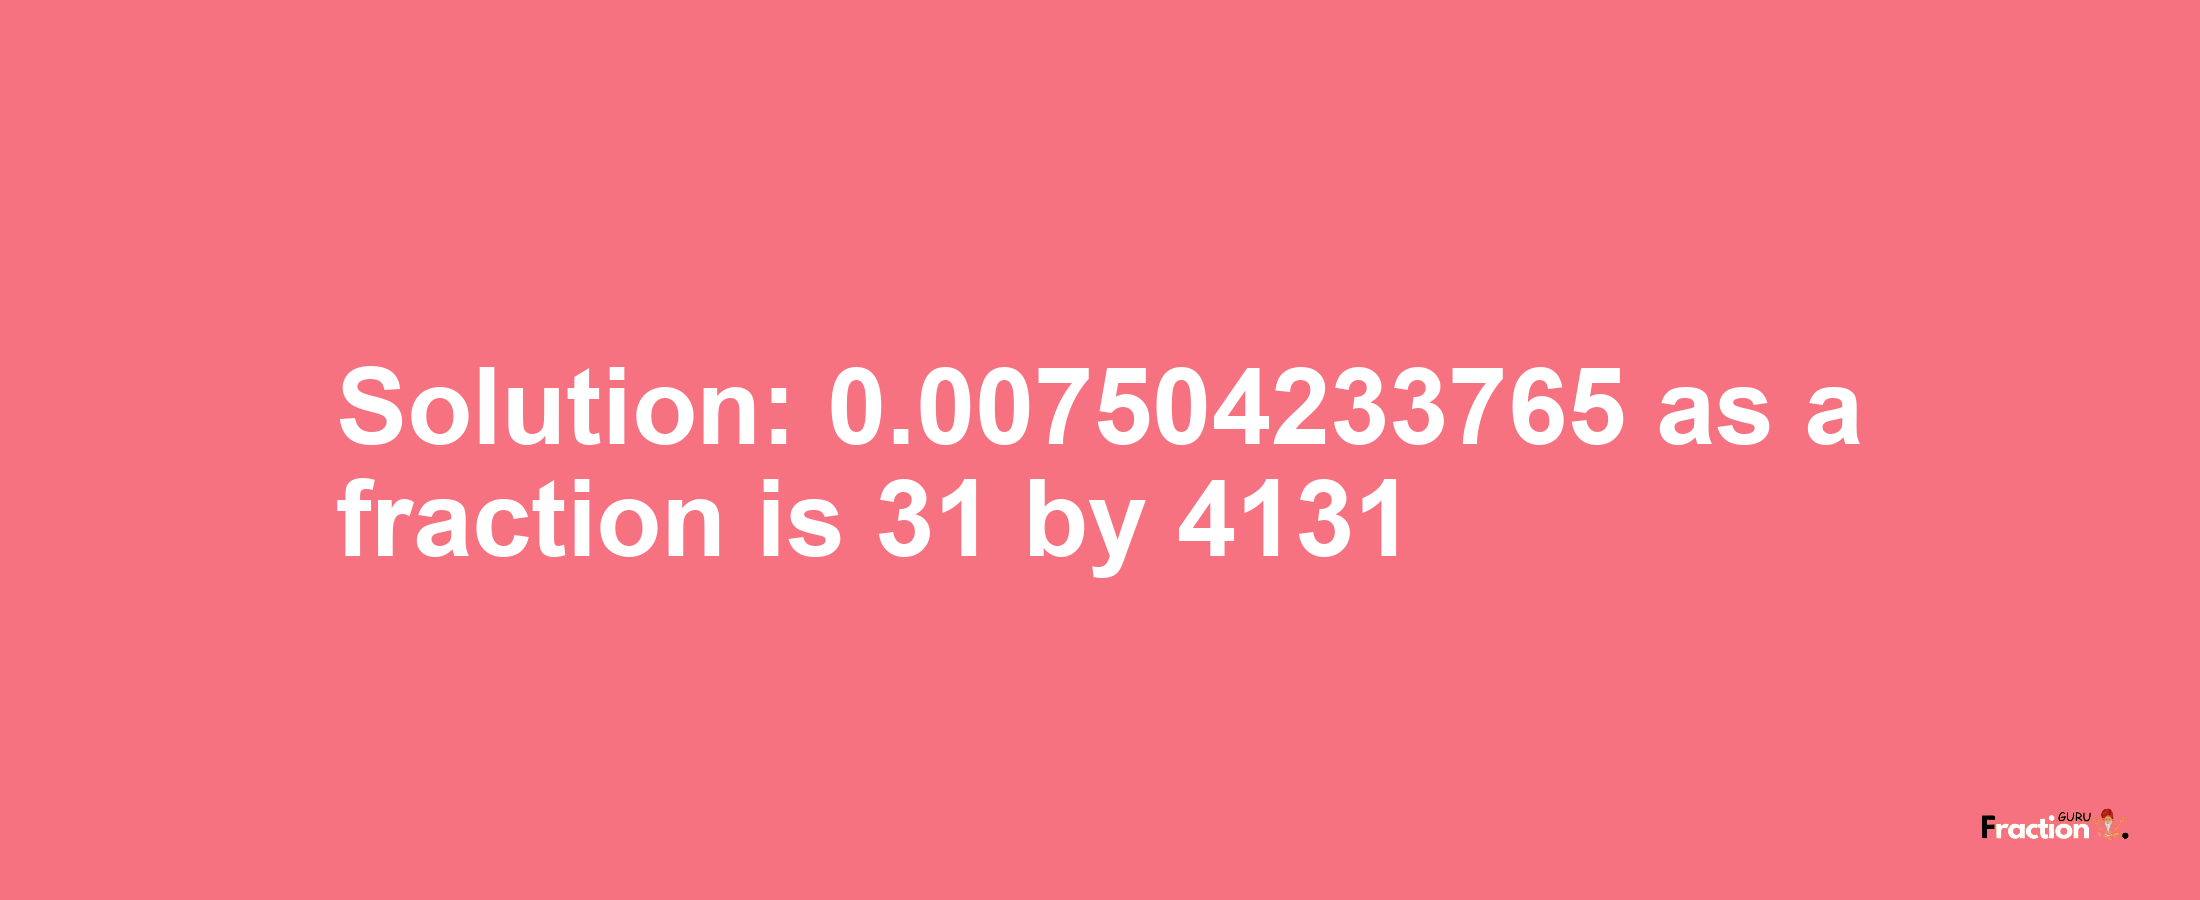 Solution:0.007504233765 as a fraction is 31/4131